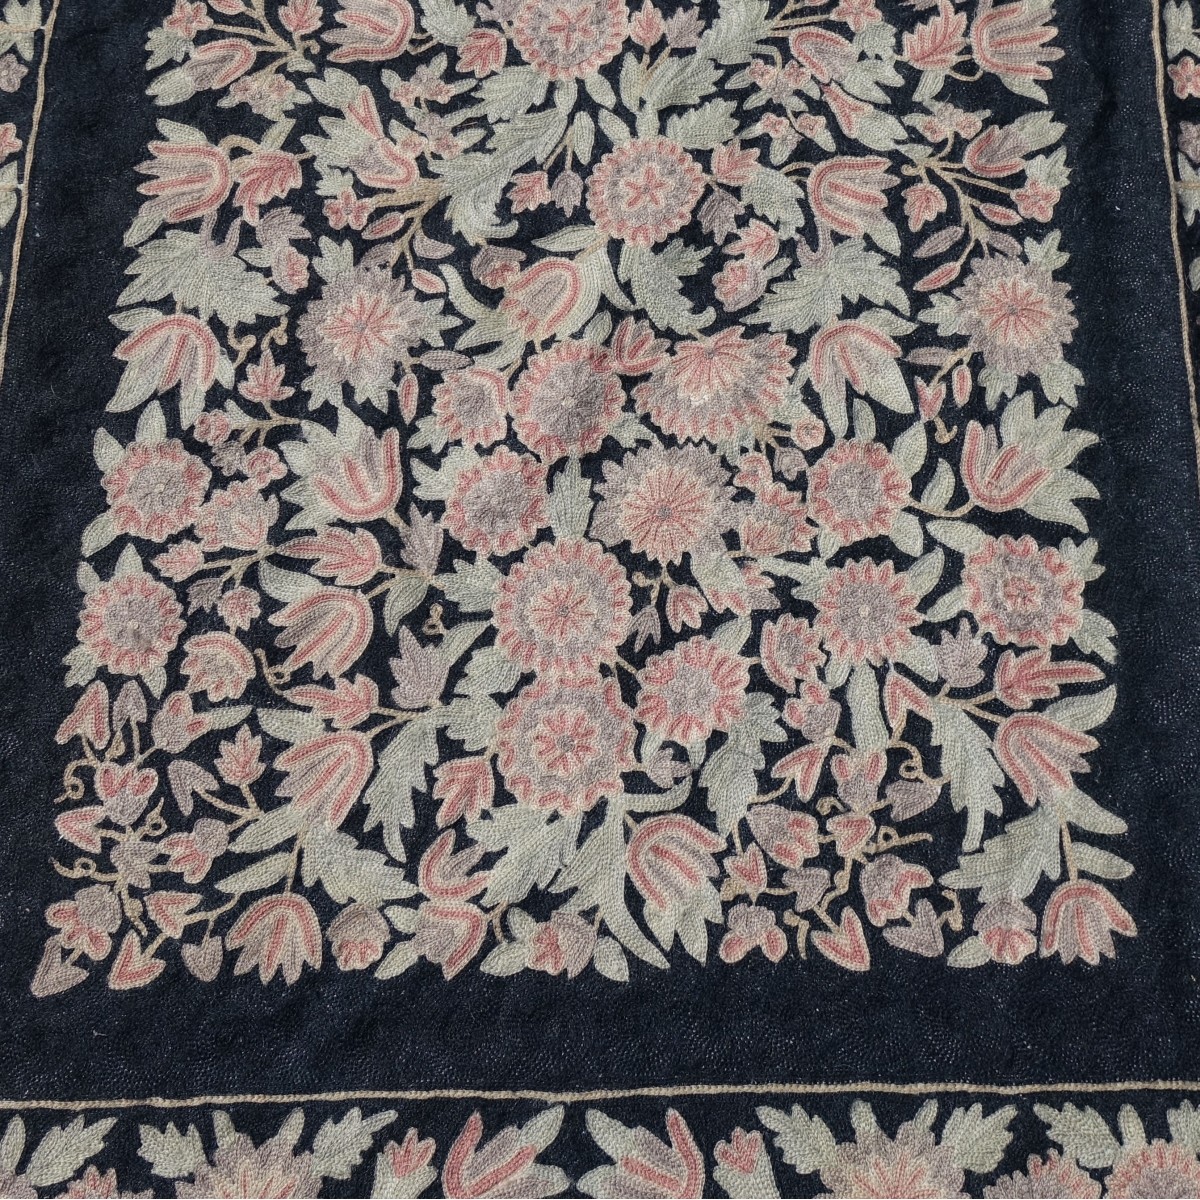 Early 20th C. Aubusson Style Rug